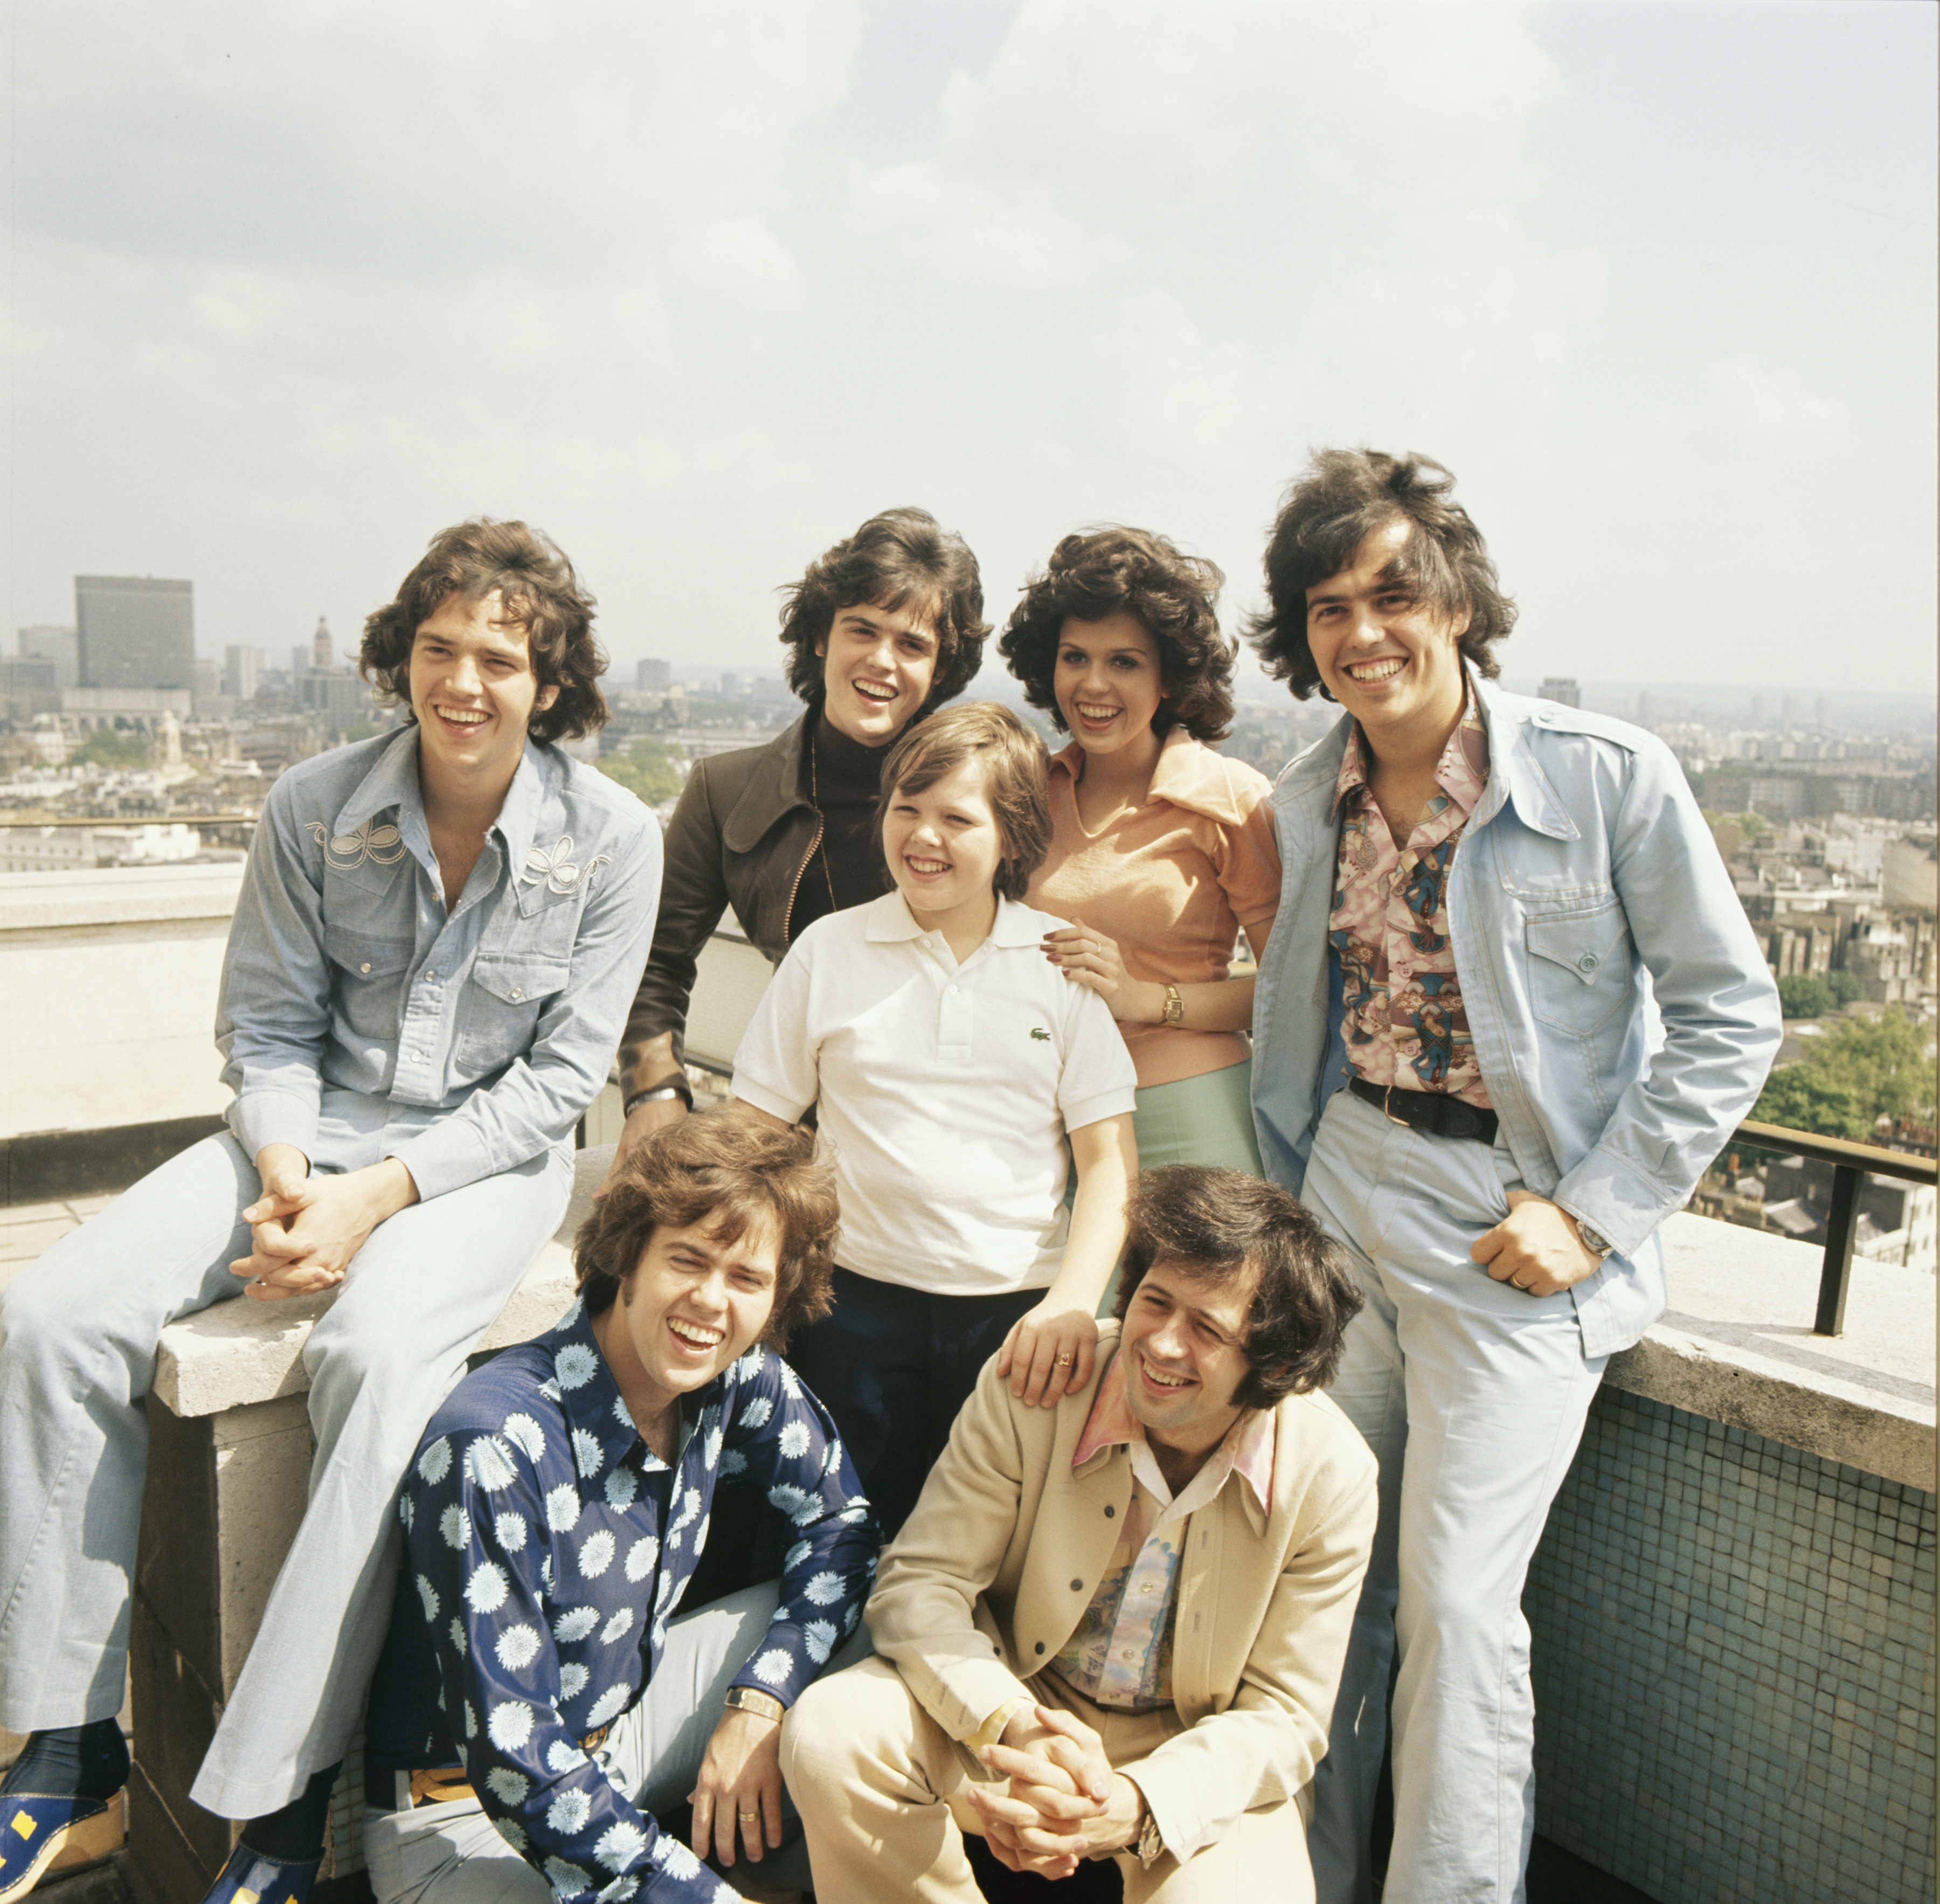 Merrill Osmond, Donny Osmond, Marie Osmond, and Jay Osmond, (front) Alan Osmond, Jimmy Osmond, and Wayne Osmond in London, England in the 1970s | Source: Getty Images